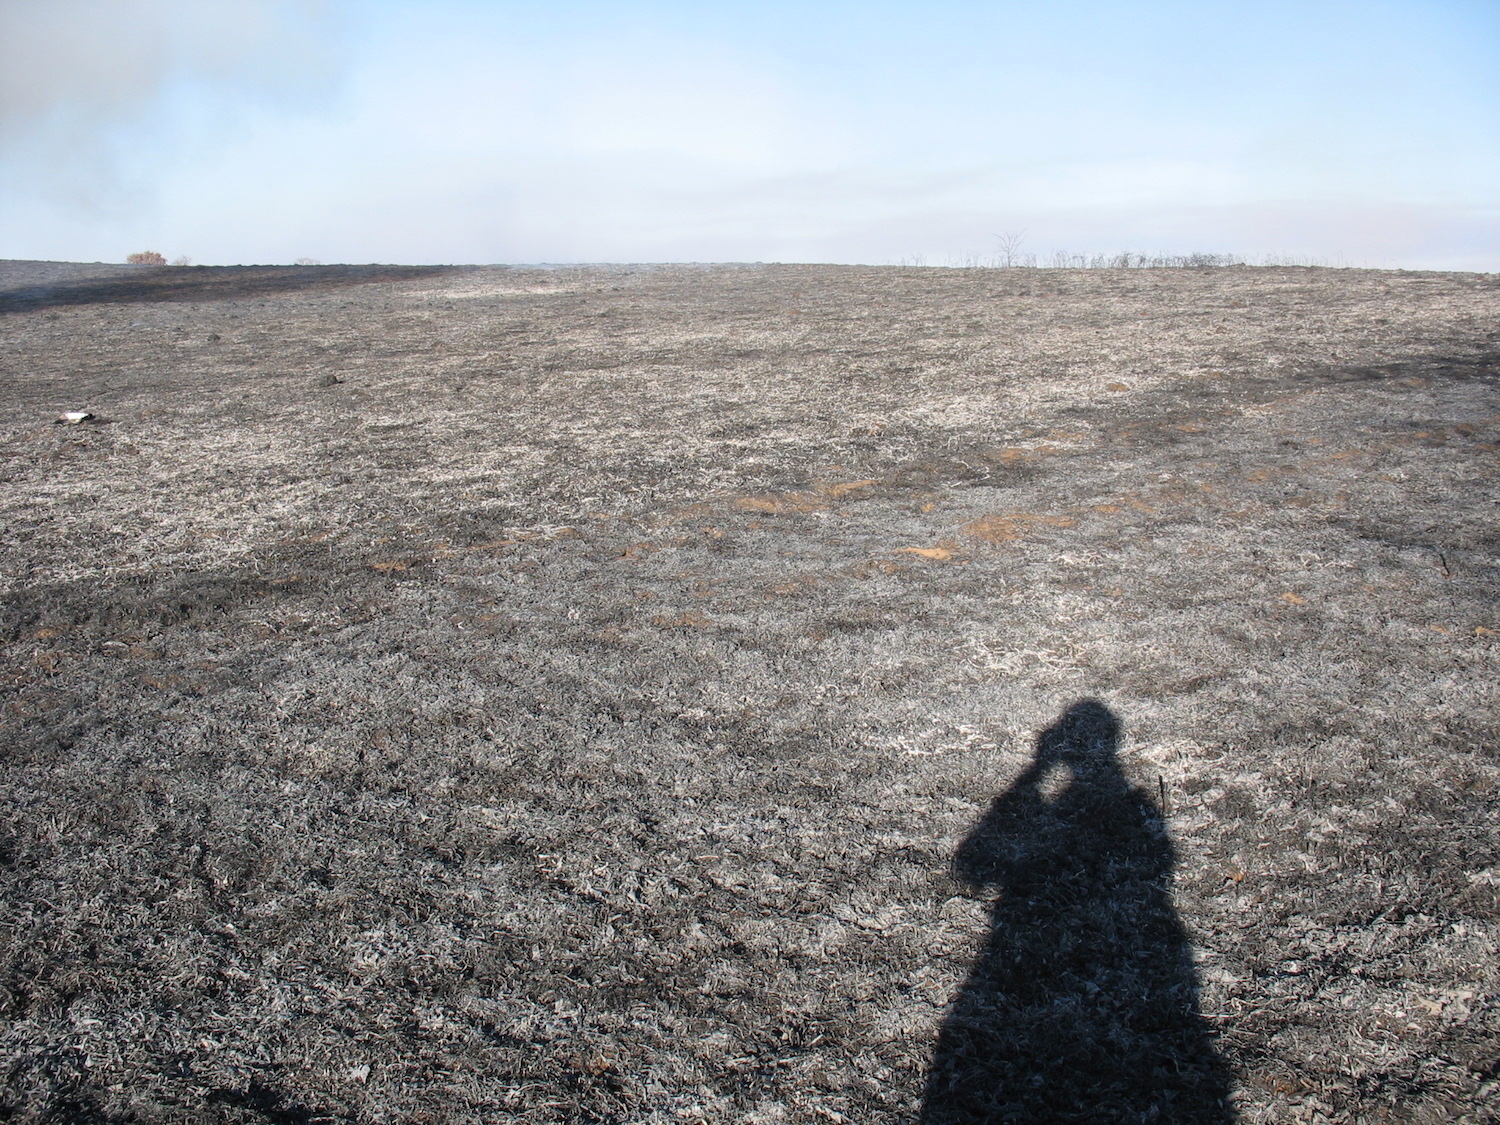 Field that has just been burned, with no vegetation left and blackened stubble